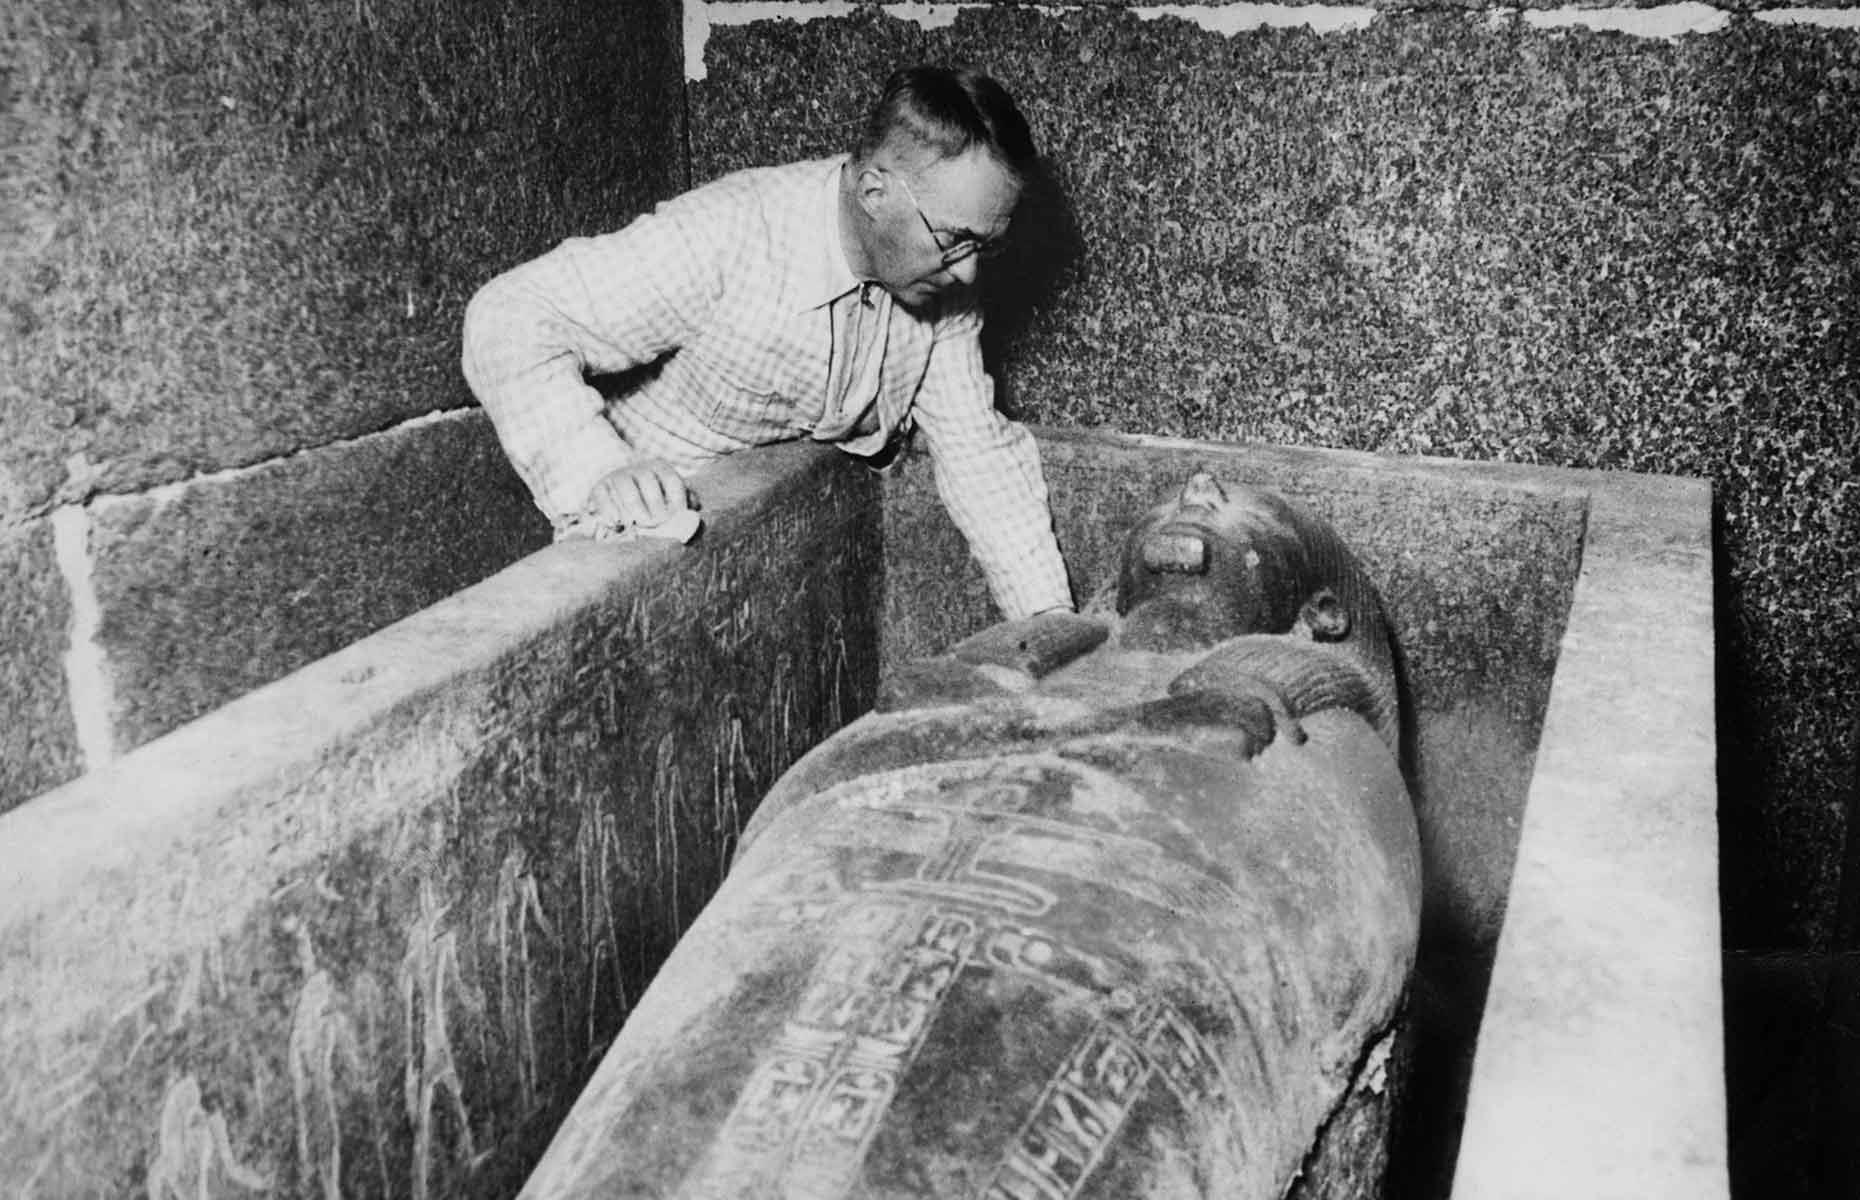 <p>In 1939, French Egyptologist Pierre Montet discovered the royal necropolis of Tanis. The underground site was almost completely untouched, which was hugely significant as not a single fully intact royal tomb had been found in Egypt until Montet's find. Kings and princes from the 21st and 22nd dynasties were buried in the necropolis complete with stone sarcophagi, silver coffins and copious amounts of gold and silver. Dubbed the Tanis Treasures, Montet's discovery was just as remarkable as Howard Carter's Tutankhamun find.</p>